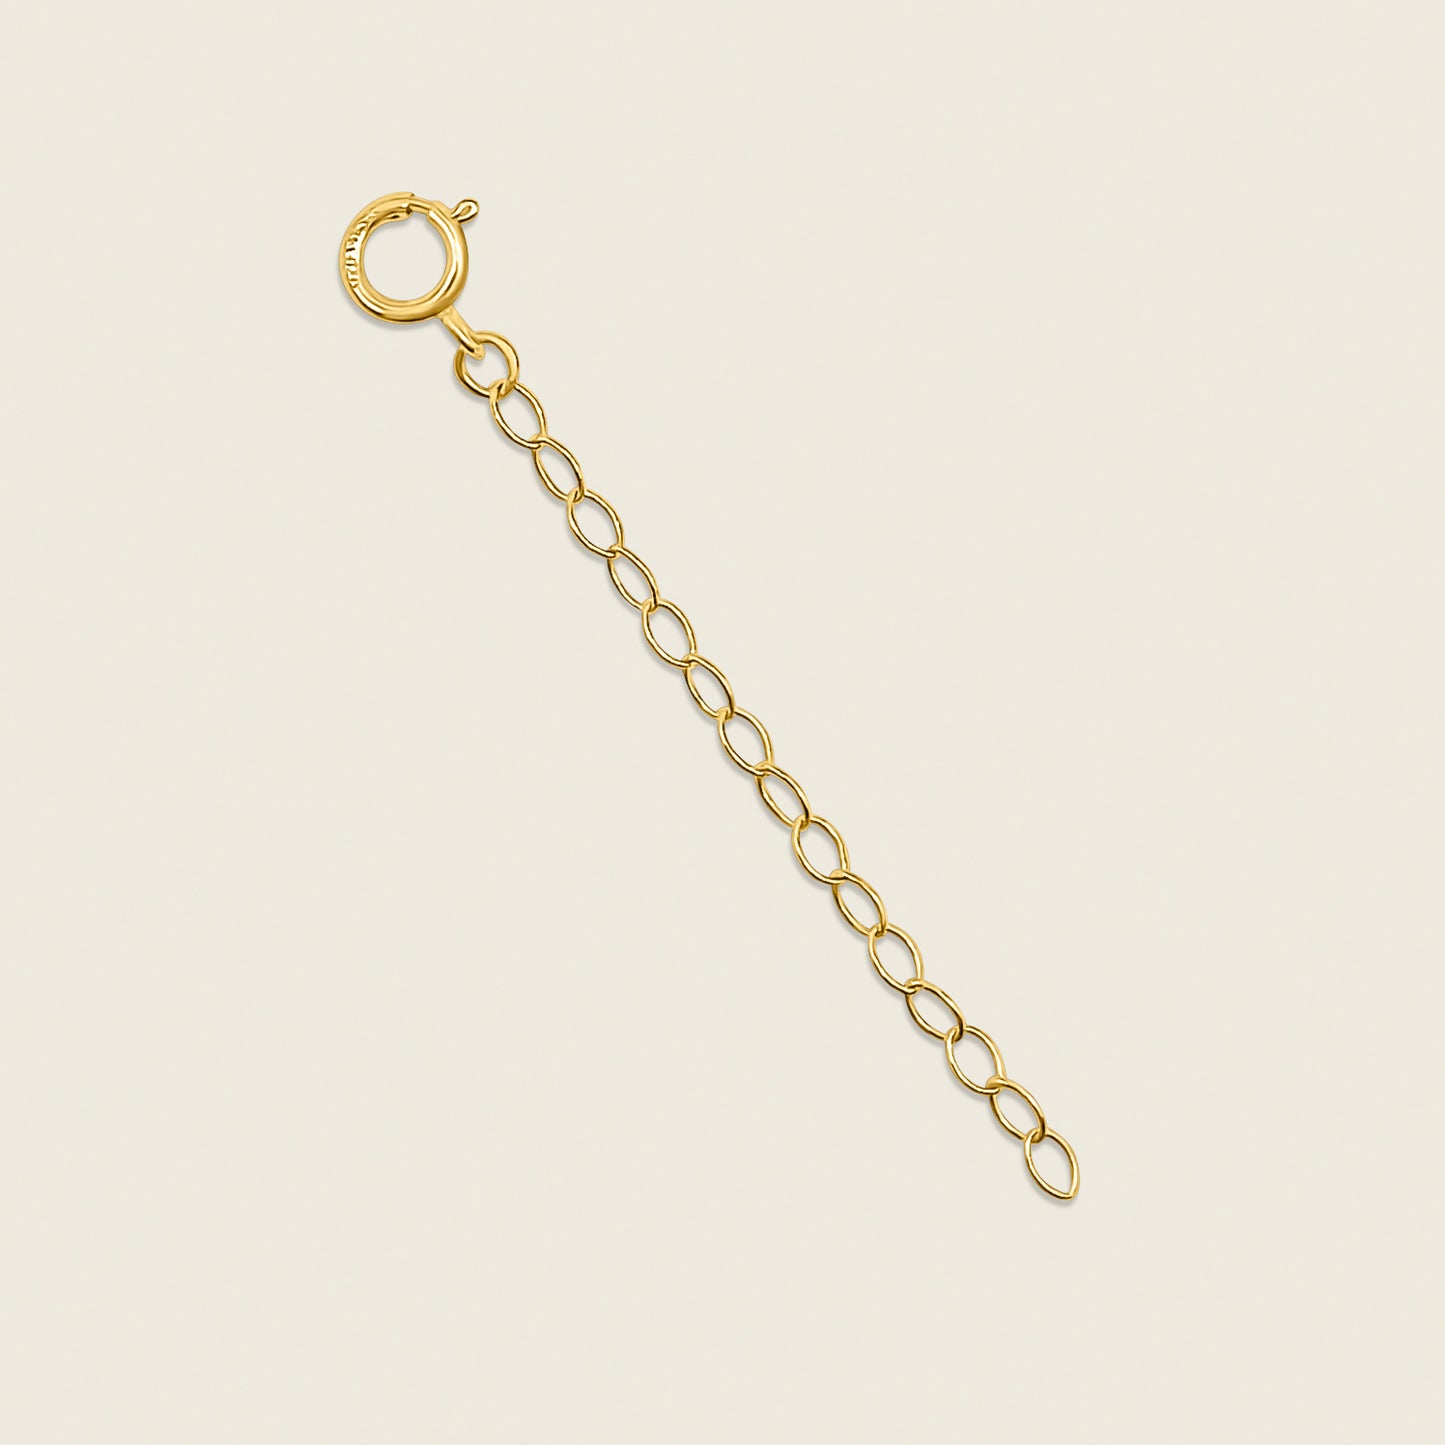 2" round clasp extender in gold filled perfect for extending necklaces or bracelets